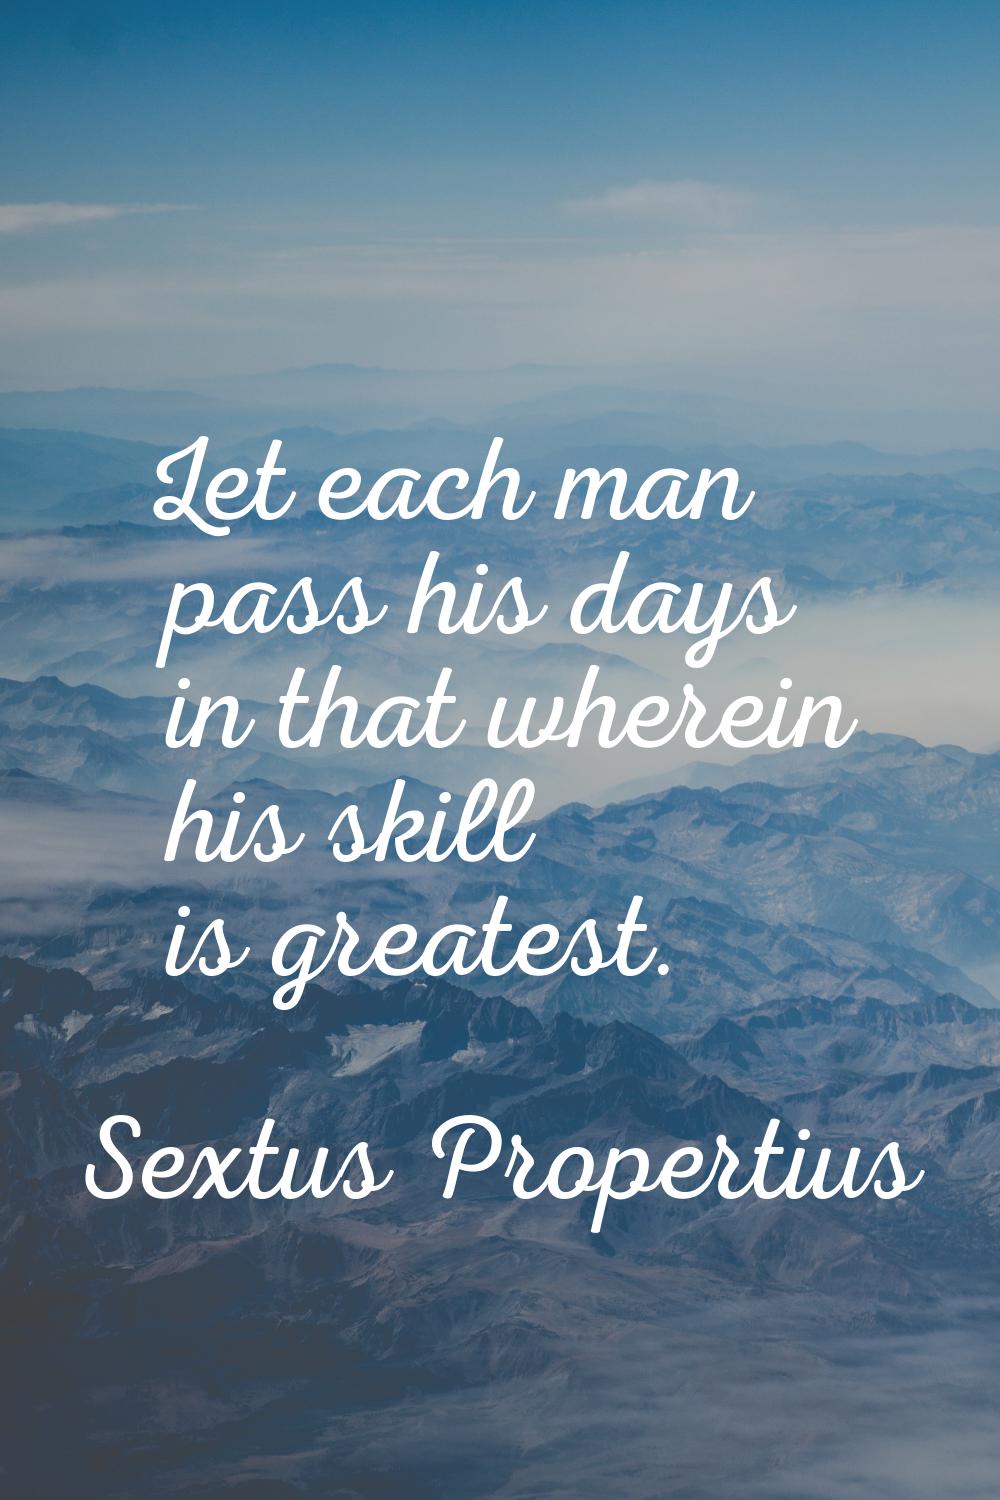 Let each man pass his days in that wherein his skill is greatest.